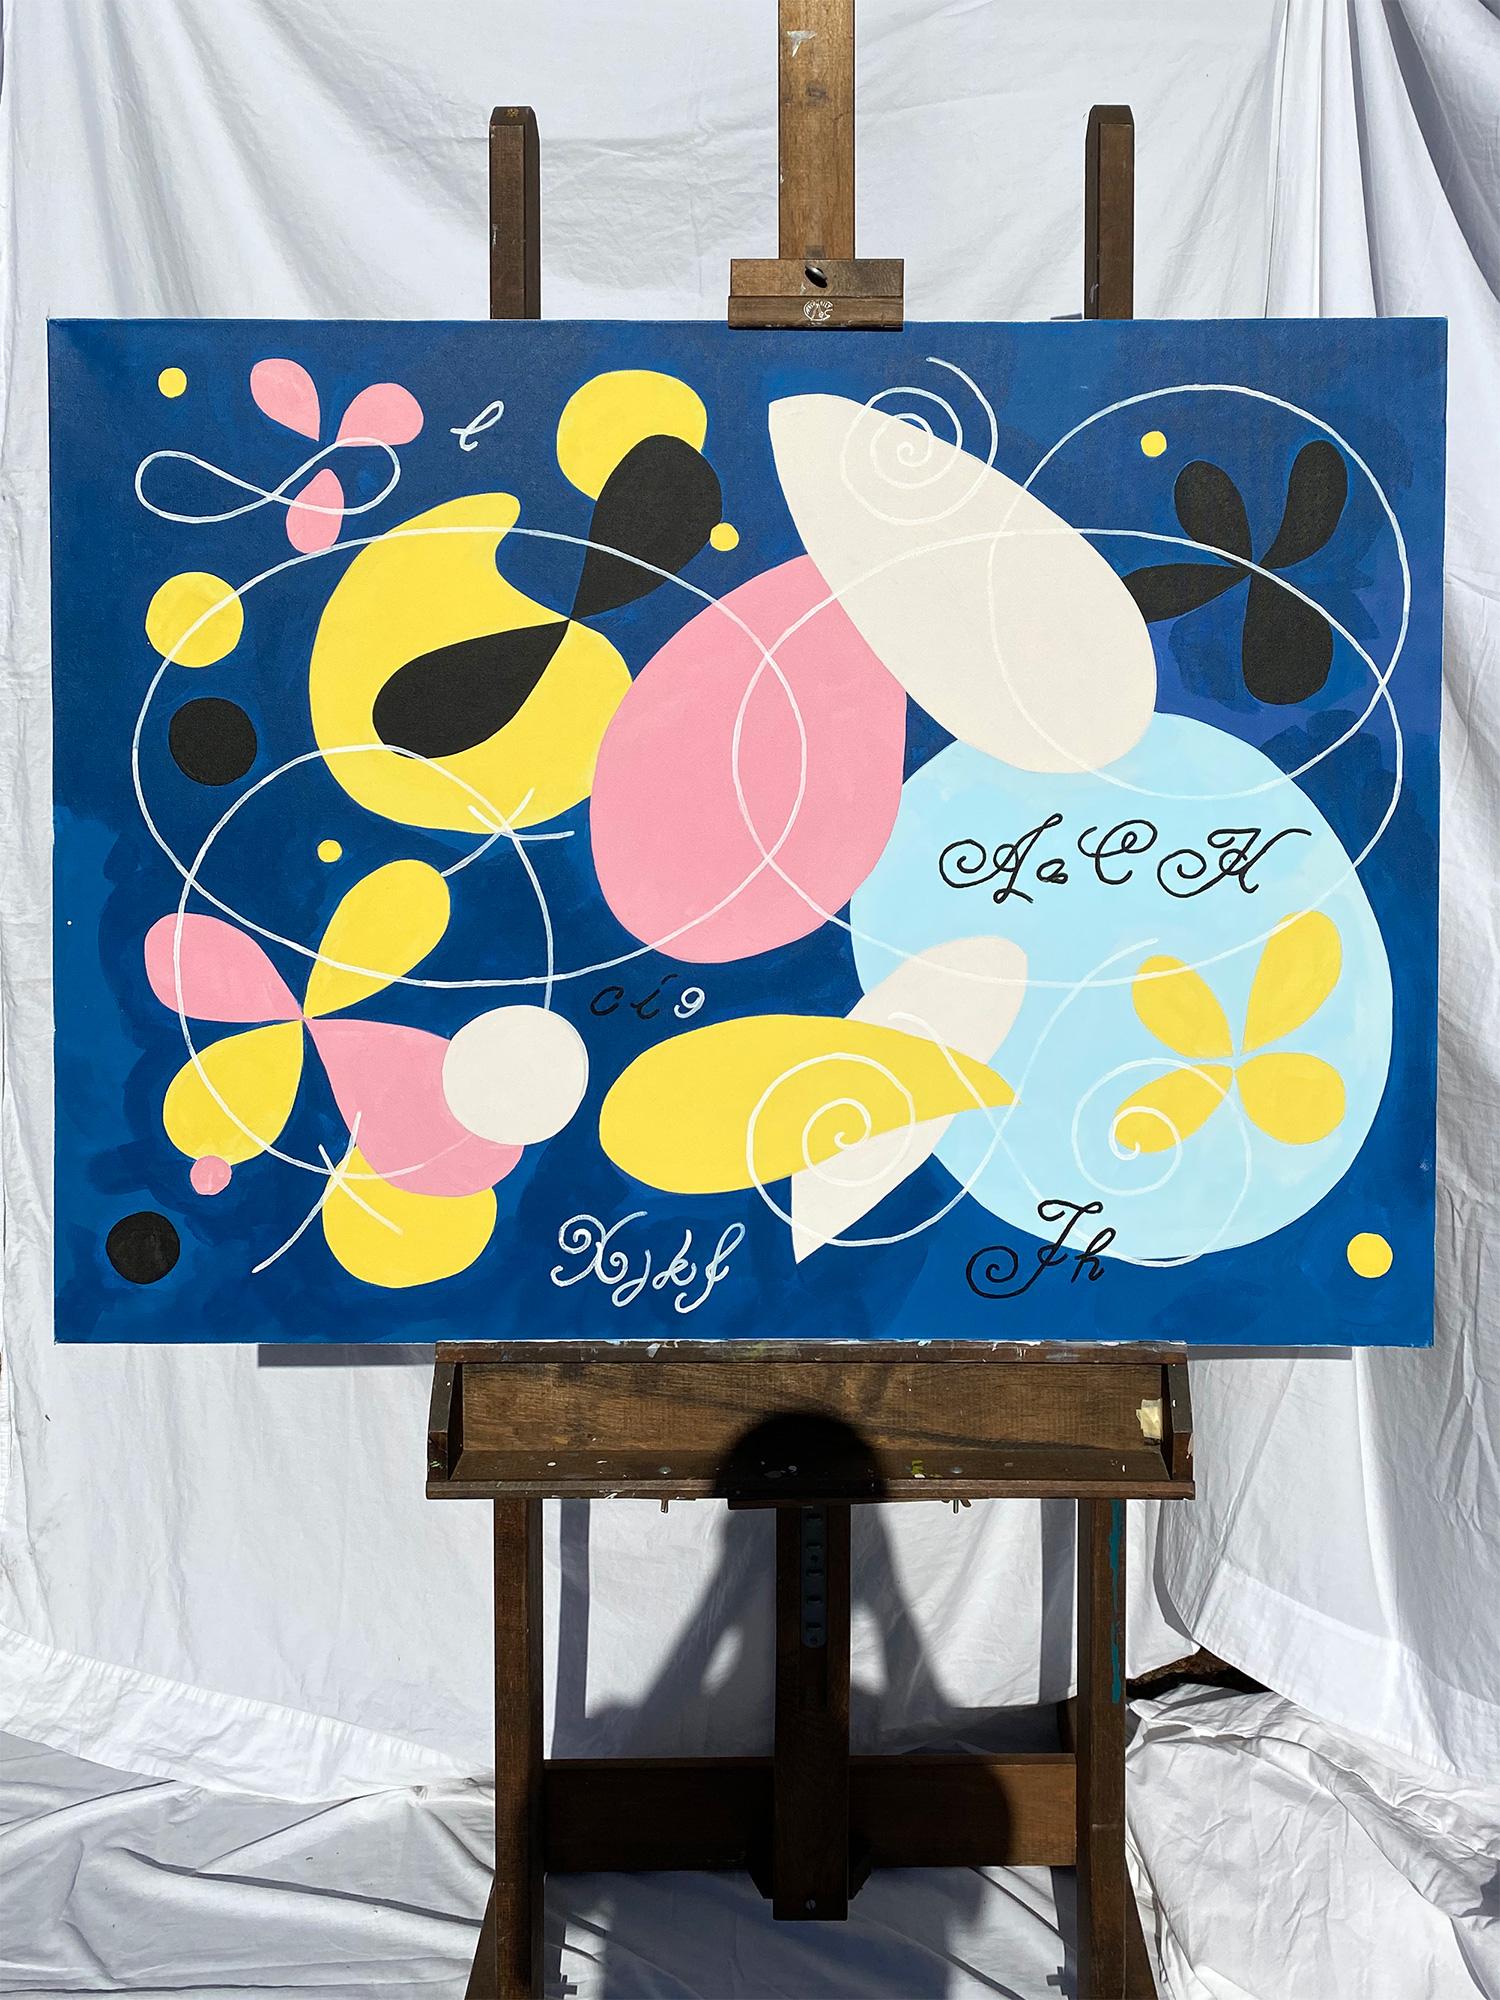 <p>Artist Comments<br>Artist Igor Dukic adopts style influences from Hilma af Klint in this abstract piece. He depicts an abstract modernist painting based on his mystical experience. On canvas, atoms dance in the ecstasy of love. Frenzied spiraling